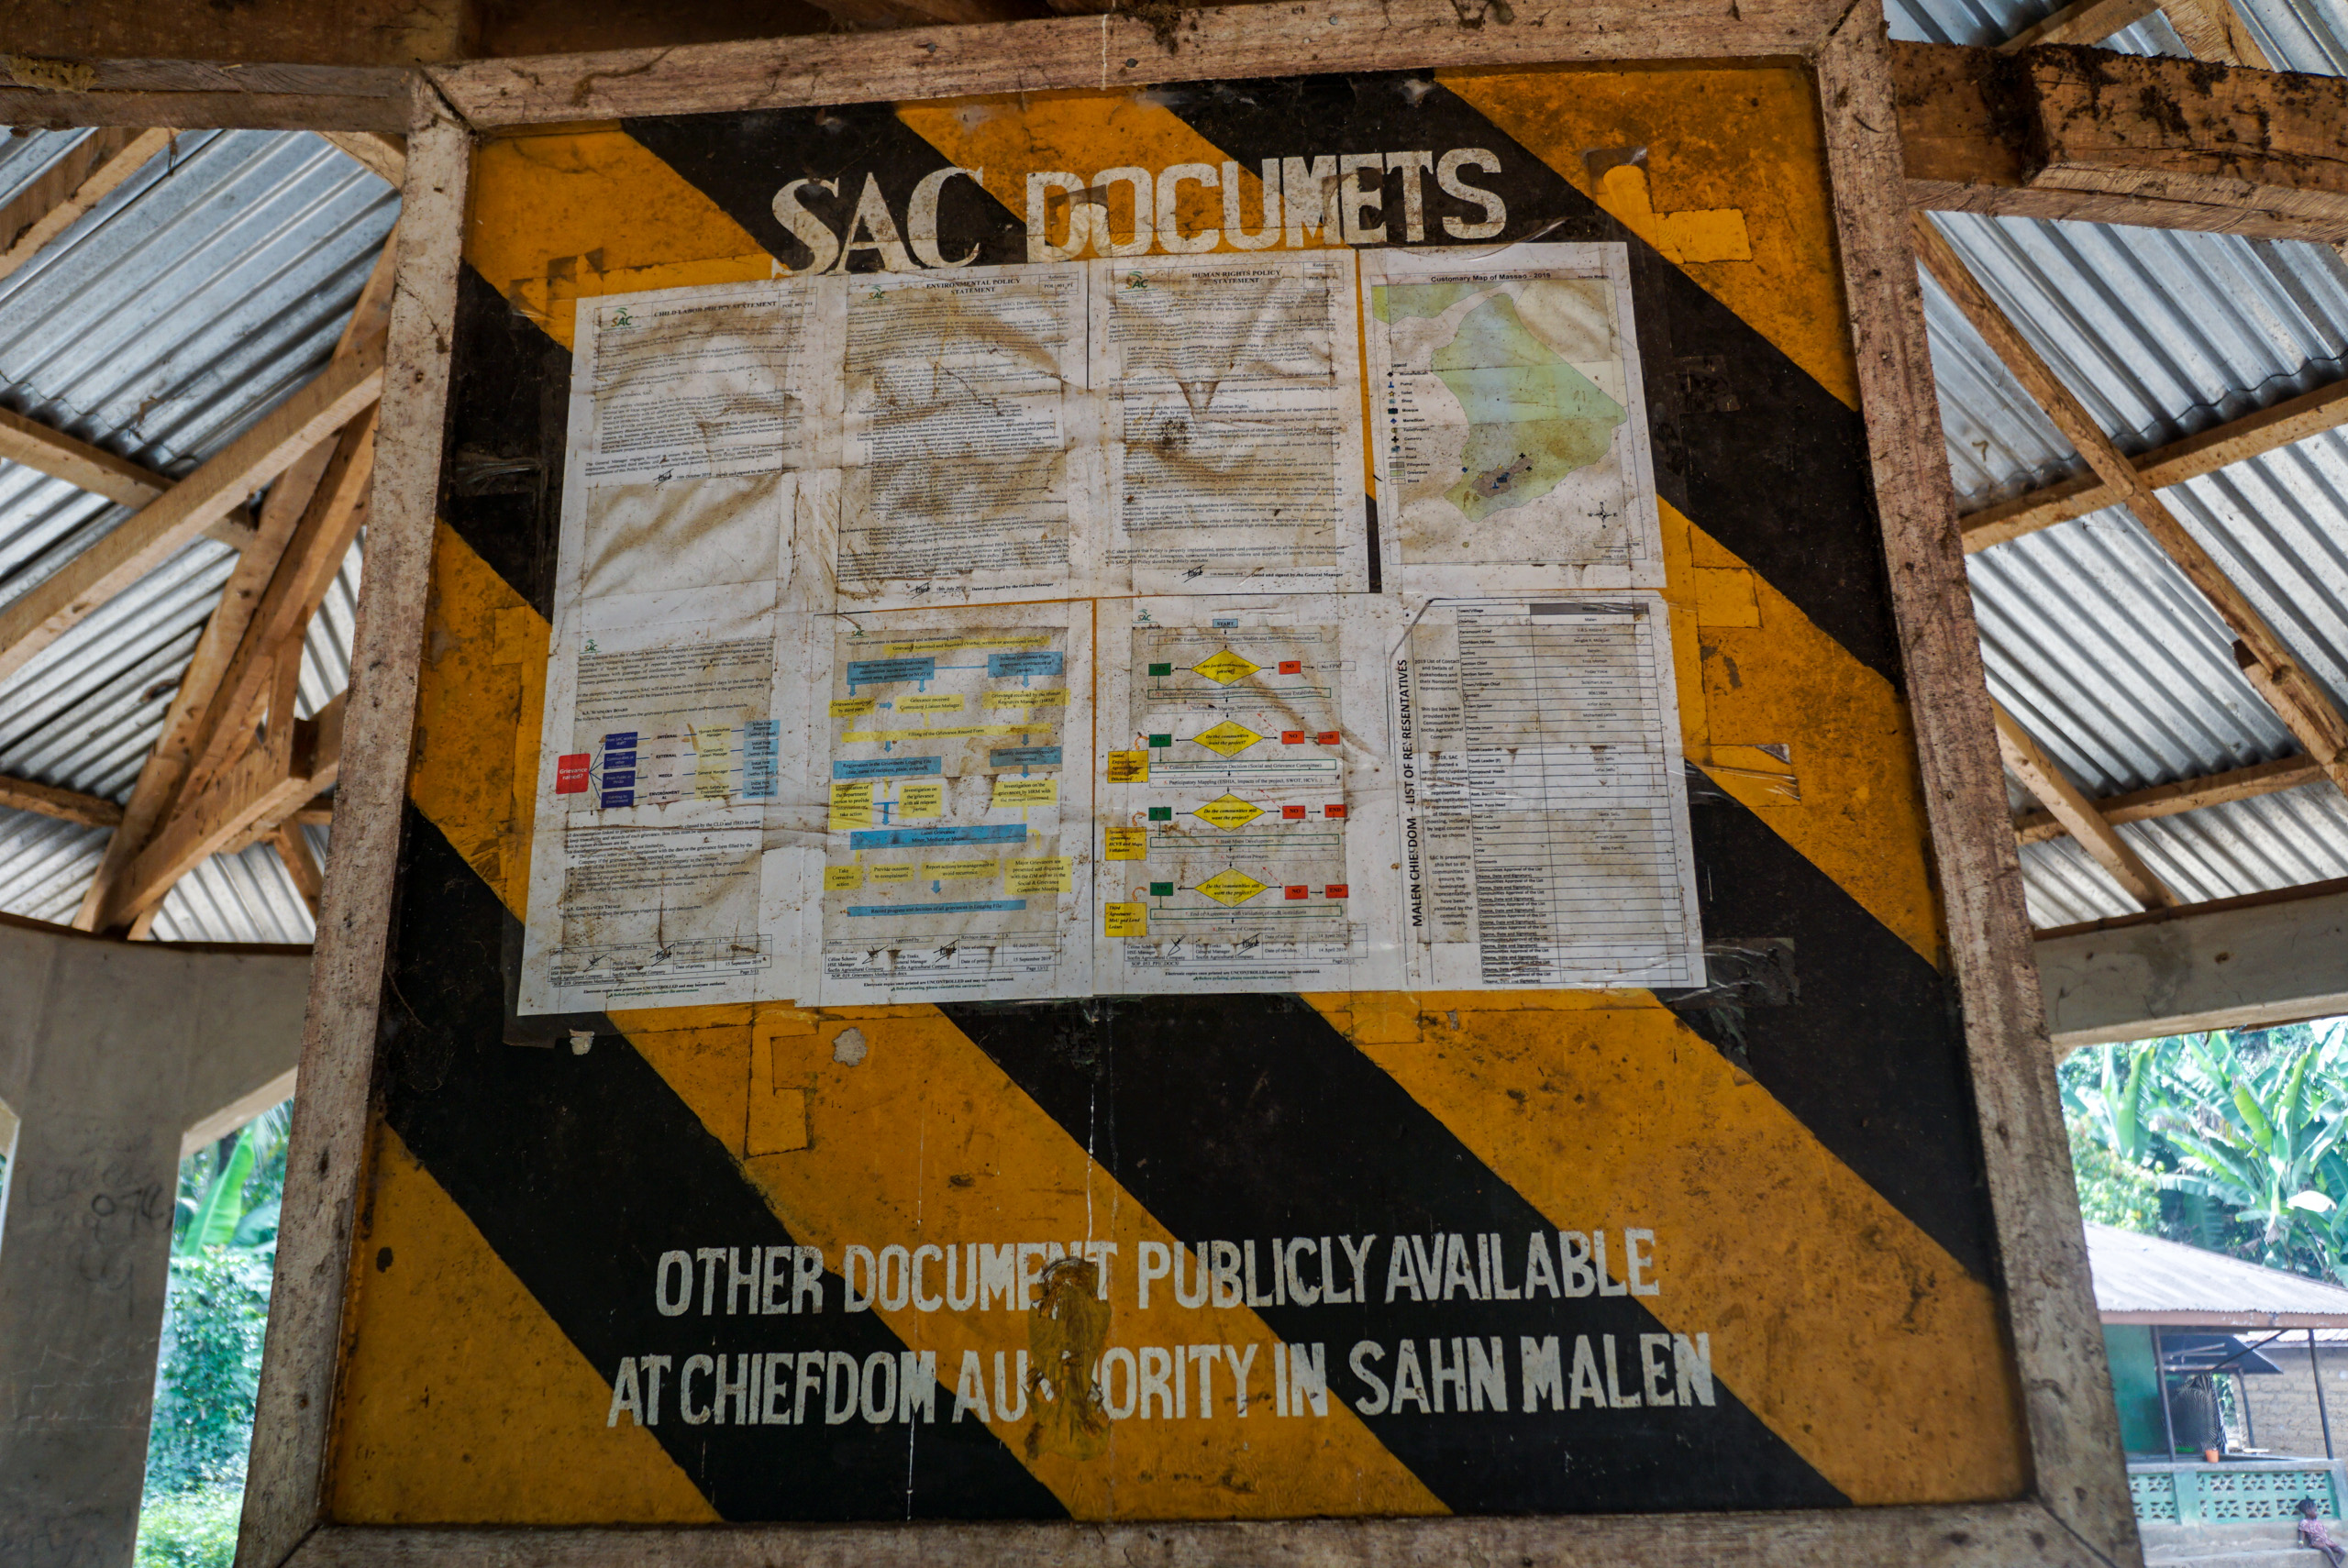 A public notice board in a Malen village meeting hall where SAC publishes information about its operations. 